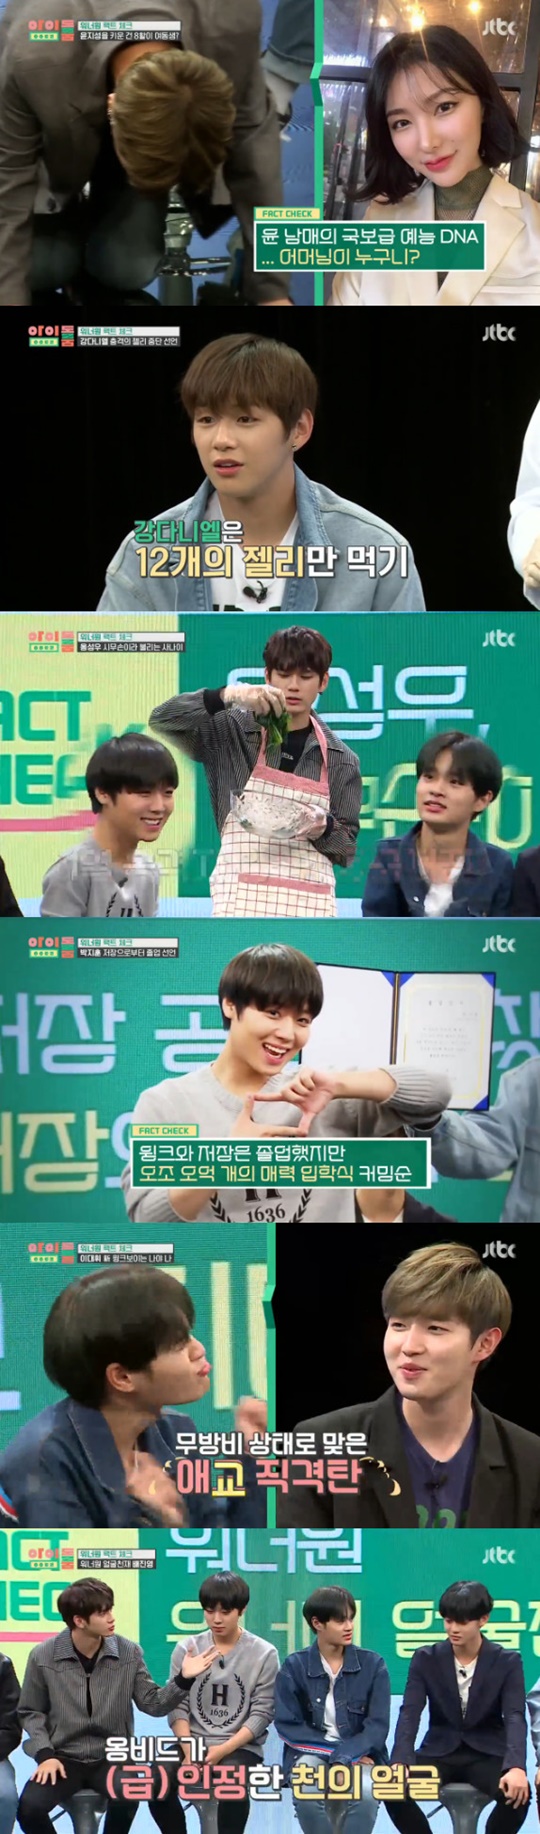 Packt checks by group Wanna One were conducted at Idol room.On the 12th, JTBCs new entertainment program Idol room was broadcast under the progress of MC Young Young-don Defcon, Wanna One (Kang Daniel Park Jihoon Lee Dae-hwan Kim Jae-hwan Ong Sungwoo Park Woo-jin Li Kwanin Yoon Ji-sung Bae Jin Young Ha Sung-woon) appeared as the first guest.First, a phone call with Yoon Ji-sung sister Yoon Seul-ki was made for Packt check that 80 is my sister who raised Yoon Ji-sung.Soon after receiving the call, Yoon Seul-ki said, Its an Omaju program about Idol room.Yoon Seul-ki began to show off his duties, saying, It contributed about 9 percent, not 80 percent. Yoon Seul-ki has left his job to prepare for the show host.When Yoon Ji-sung revealed that his brother had a Celeb disease, Yoon Seul-ki allowed him to release the photo, saying, Please open the way to Celeb.Kang Daniel has conducted a Packt check on Declaration of a Gelatin dessert suspension of shockI have a tooth decay and Im refraining from taking the Gelatin dessert, Kang Daniel said.A 30-year-old dentist appeared to examine Kang Daniels dental condition, which he said was about five bags of Gelatin dessert in Haru.Dr. Kang Daniel suggested to Kang Daniel that only take 12 Gelatin desserts in Haru, and Kang Daniel looked frustrated as if he had lost the world.Ong Sung-woo conducted a Packt check on the man called Simuson, which means that it is sexy even if the spinach is not dried.In this case, spinach appeared in the studio, and Ong Sung-woo wore a plastic glove while playing a medical drama drama. Ong Sung-woo poured salt in the air, following the bluff salt spray of chef Choi Hyun-seok.Then, Ong Sung-woo made a deadly look and touched spinach and warmed up the atmosphere.Park Jihoon shocked by declaring The Graduate from the buzzword Step in My Heart.I think Ive only shown a lot of cute things, Park Jihoon said.So, Jeong Hyeong-don demanded storage in my heart and a cool look beyond wink.From Idol room to The Graduate chapter, it was delivered to Park Jihoon, and Park Jihoon was surprised that it seems to be getting bigger.Lee Dae-hwi explained the rumor of a new winkboy. Park Woo-jin reported, I saw Lee wink to thank the security company staff.Kang Daniel also reproduced Lee Dae-huis slumber, saying, After the shower, I saw my head and shook my head.Lee Dae-hui said, No, but he showed a natural charm to his body.In addition, Hwang Min-hyun proved a white leg without hair, and Ha Sung-woon proved a thick lips.Kim Jae-hwan laughed when Park Woo-jin claimed that the moving joints move together like telepathy when dancing.Park Woo-jin completed a Packt check for 111cm in leg length, with the all-round dance king, Bae Jin Young a facial genius, and Li Kwanlin.